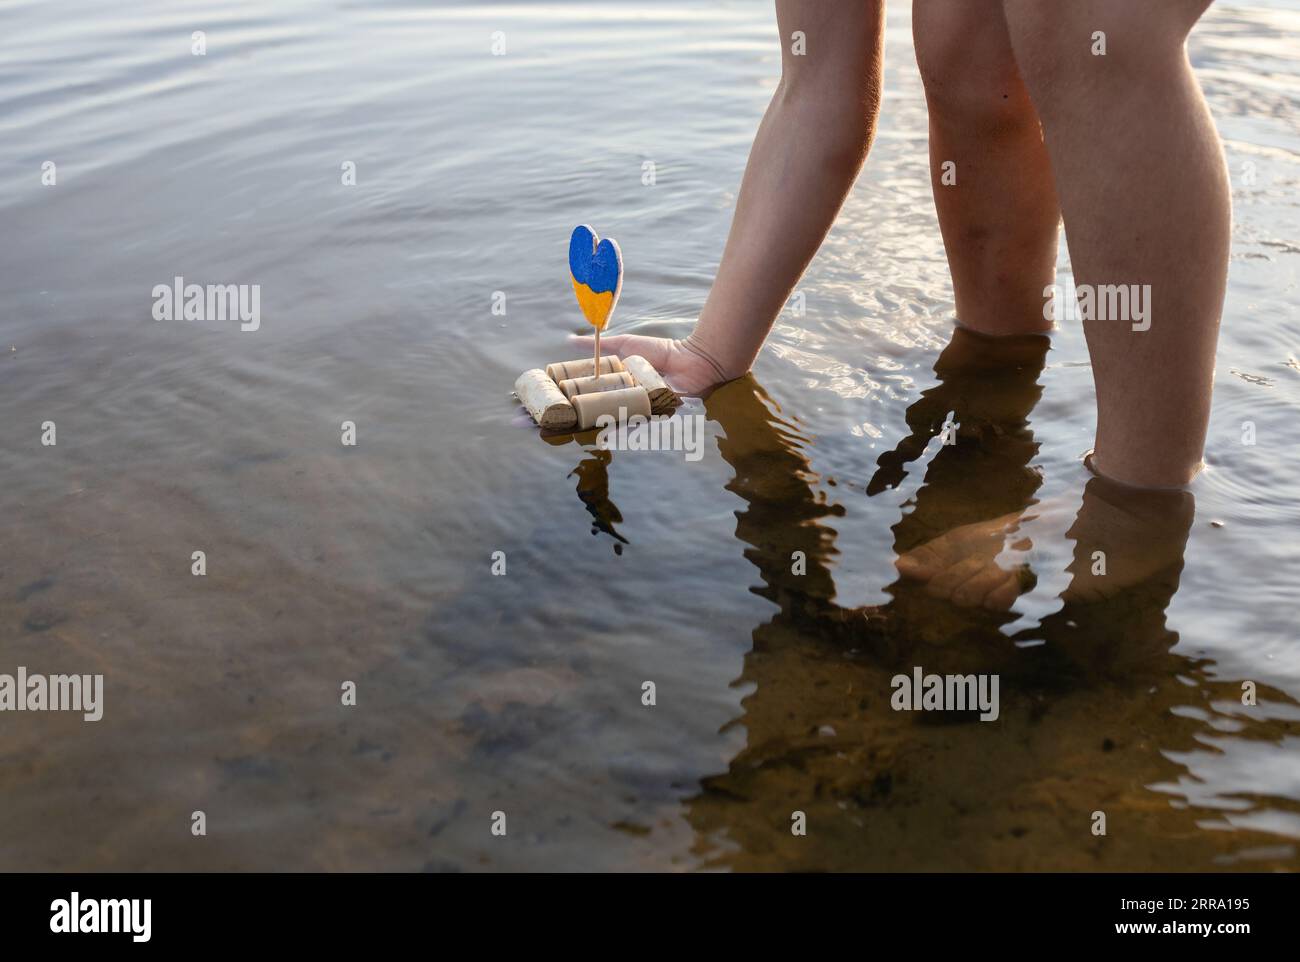 child, standing in a river, launches a home-made boat made of wine corks, instead of sail, a yellow-blue heart in colors of Ukrainian flag. Symbol of Stock Photo